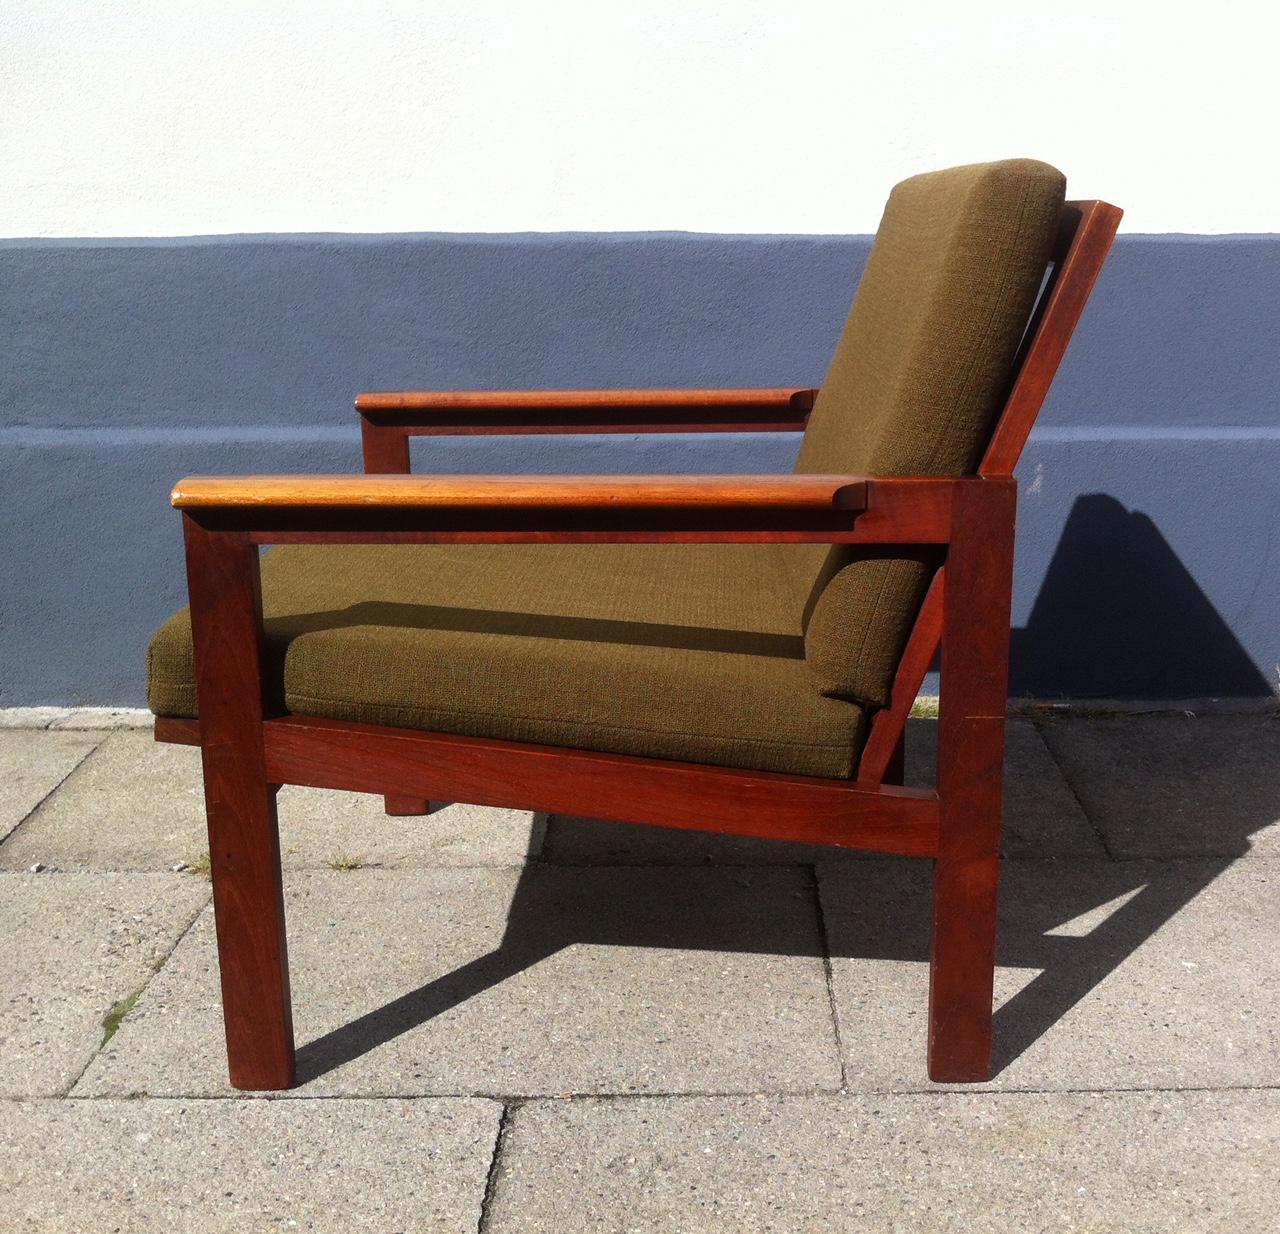 This lounge chair no. 4 or the Capella chair was designed by Illum Wikkelsø in 1959 and manufactured by Niels Erik Eilersen in the early 1960s. It features original dark green upholstery.